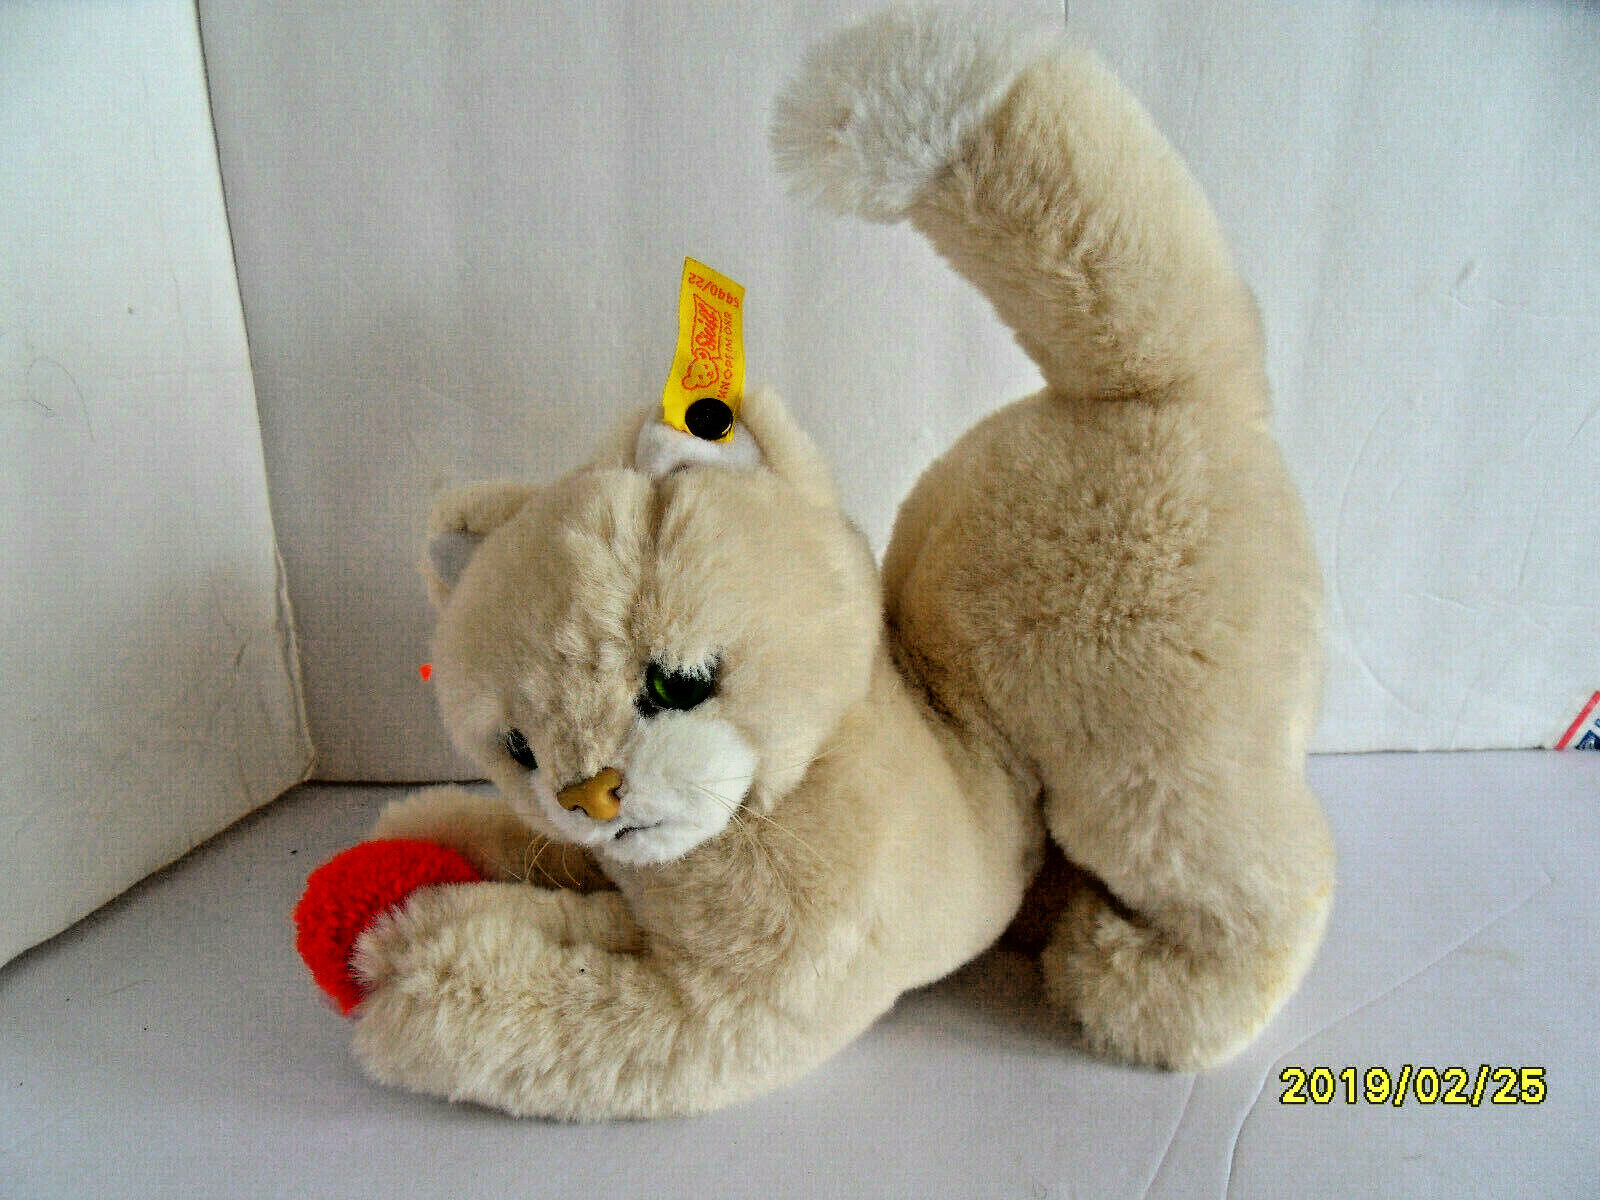  Steiff cat button flag large  stuffed animal made in Germany 2700 ING 